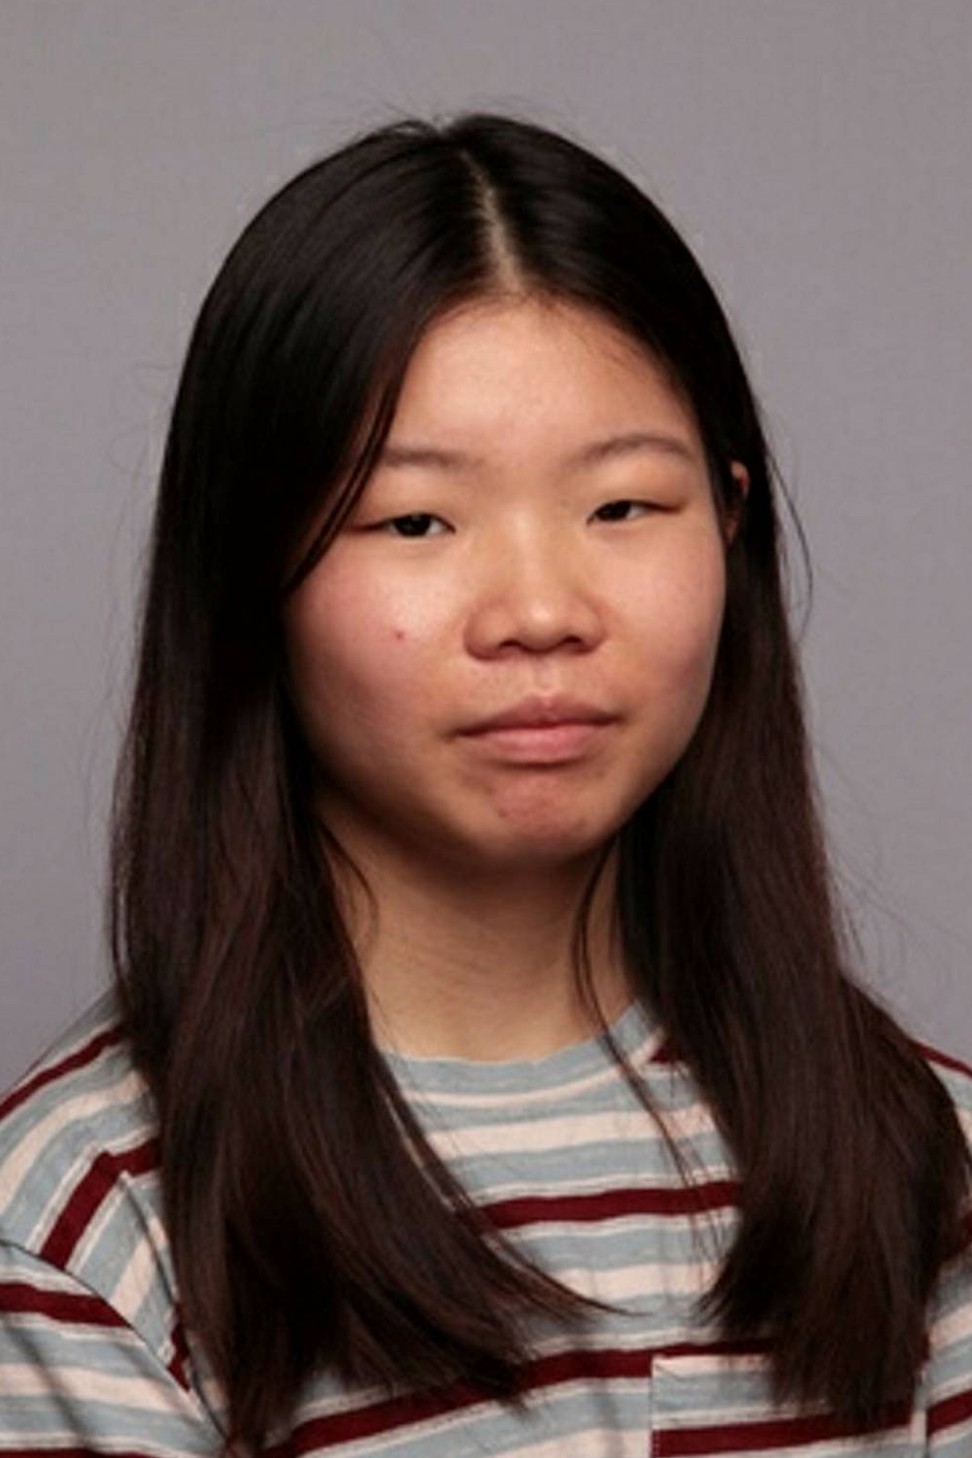 Johanne Zhangjia Ihle-Hansen, step-sister of accused Norway mosque shooter Philip Manshaus. Photo: Handout